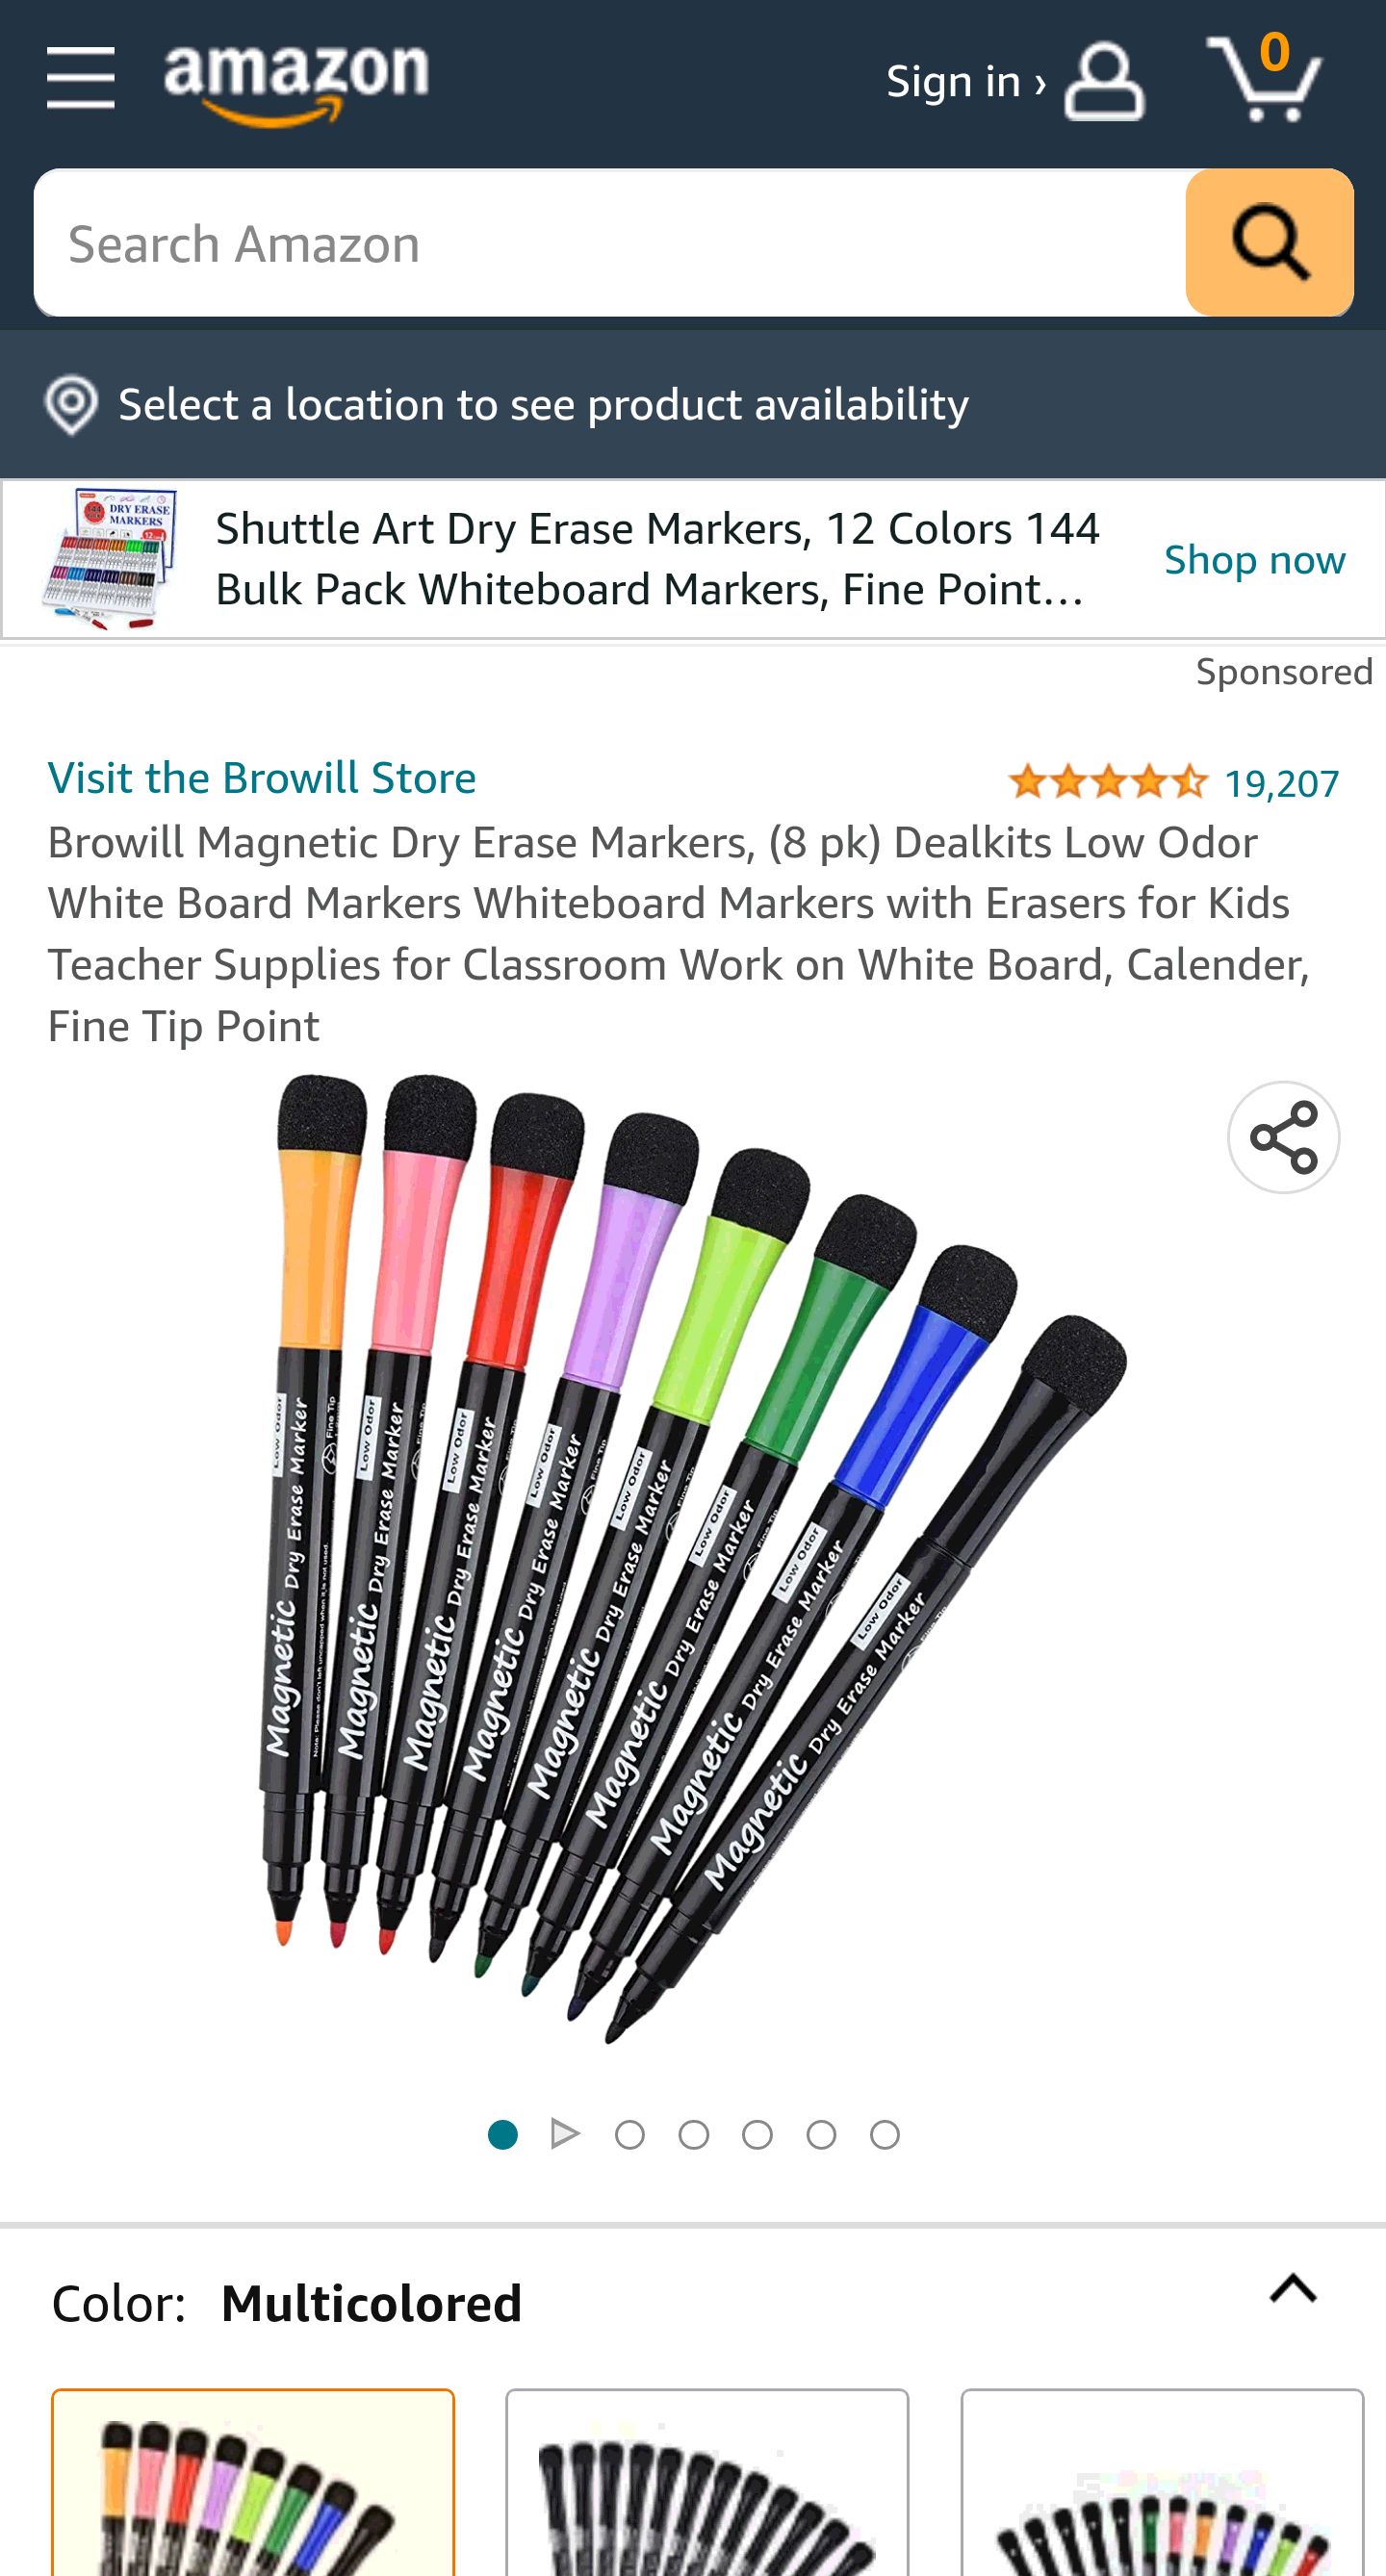 Browill Magnetic Dry Erase Markers, (8 pk) Dealkits Low Odor White Board Markers Whiteboard